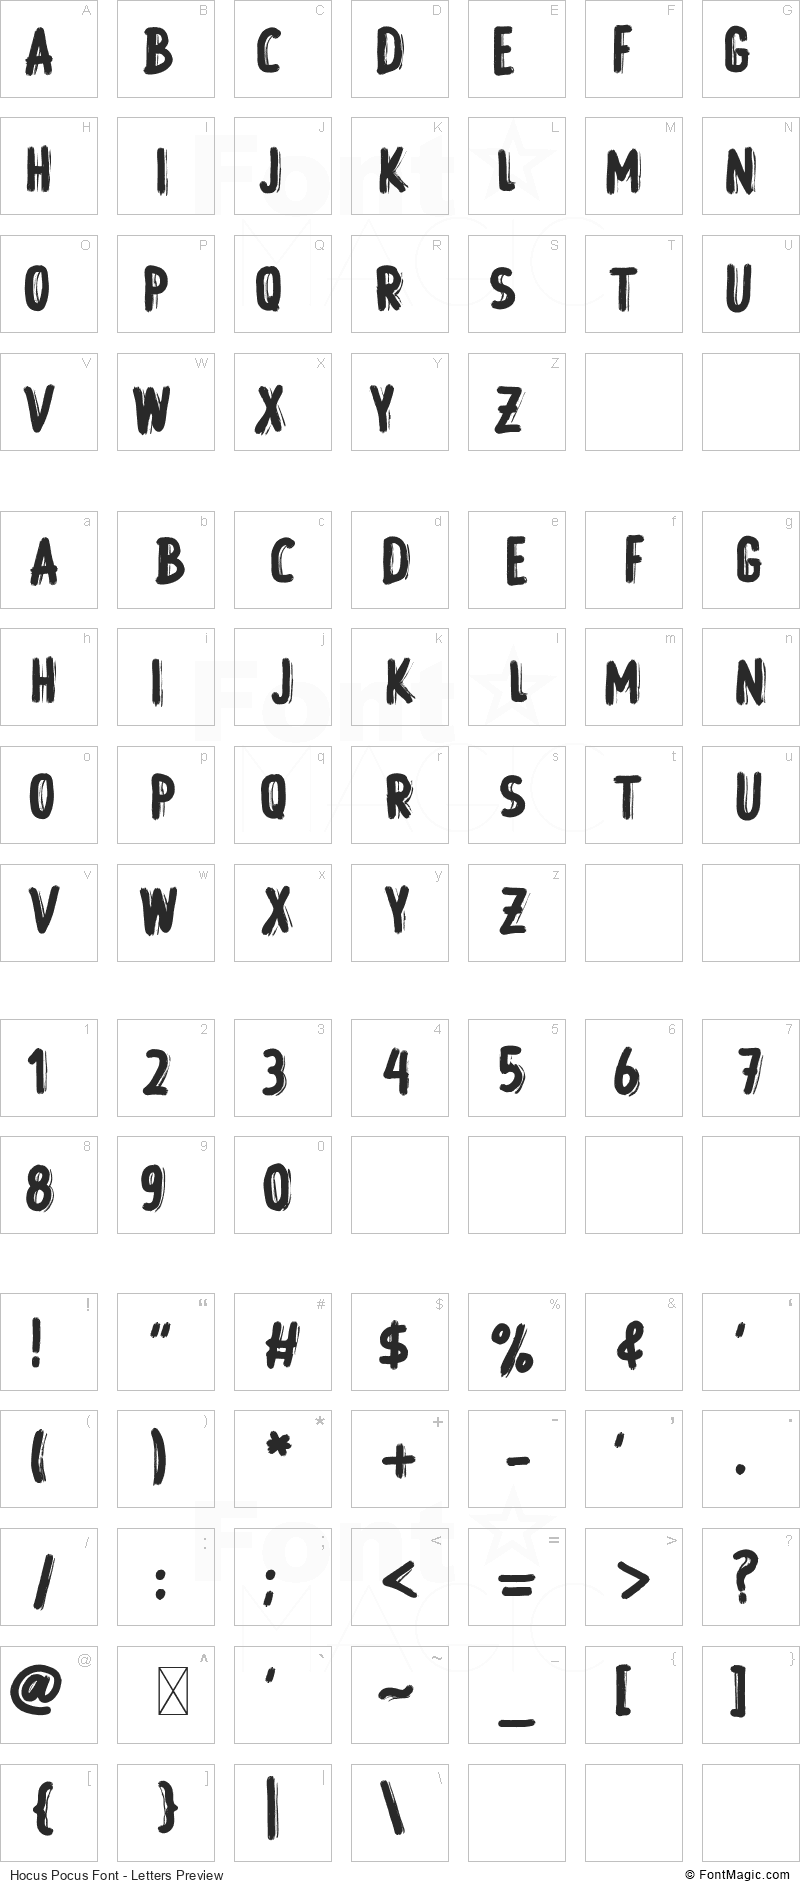 Hocus Pocus Font - All Latters Preview Chart